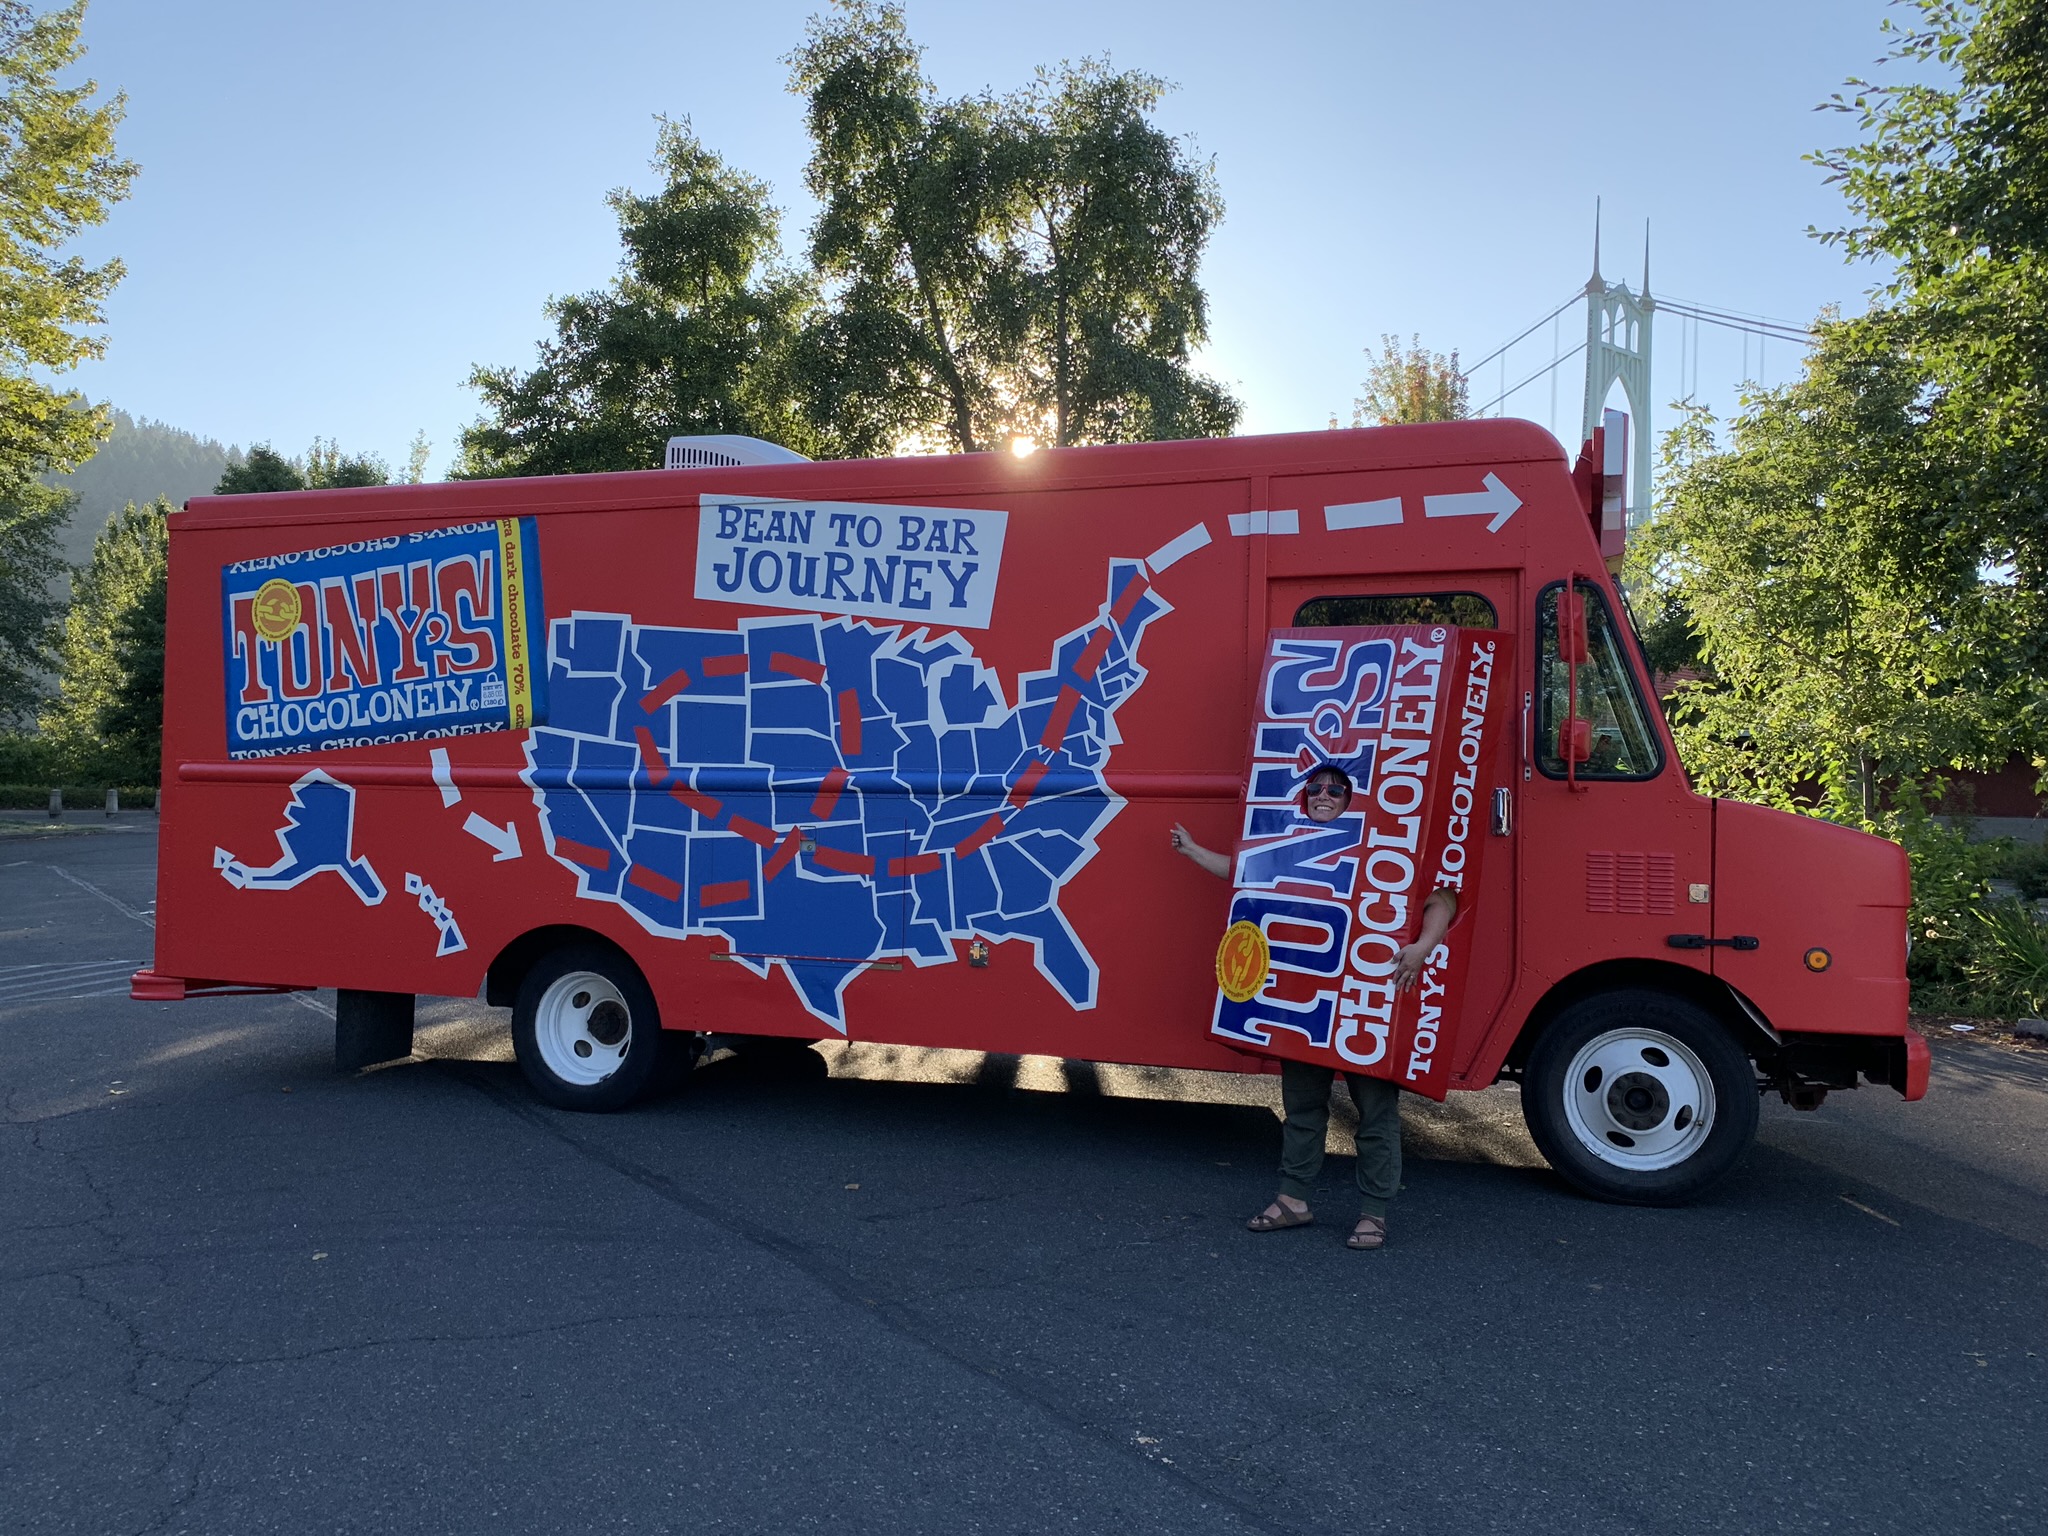 On the road again.. It&rsquo;s time for part two of the Bean to Bar Journey! Look out East Coast, the Chocotruck is headed your way. Next stop: Vermont! Click the link in our bio for more info about the tour.